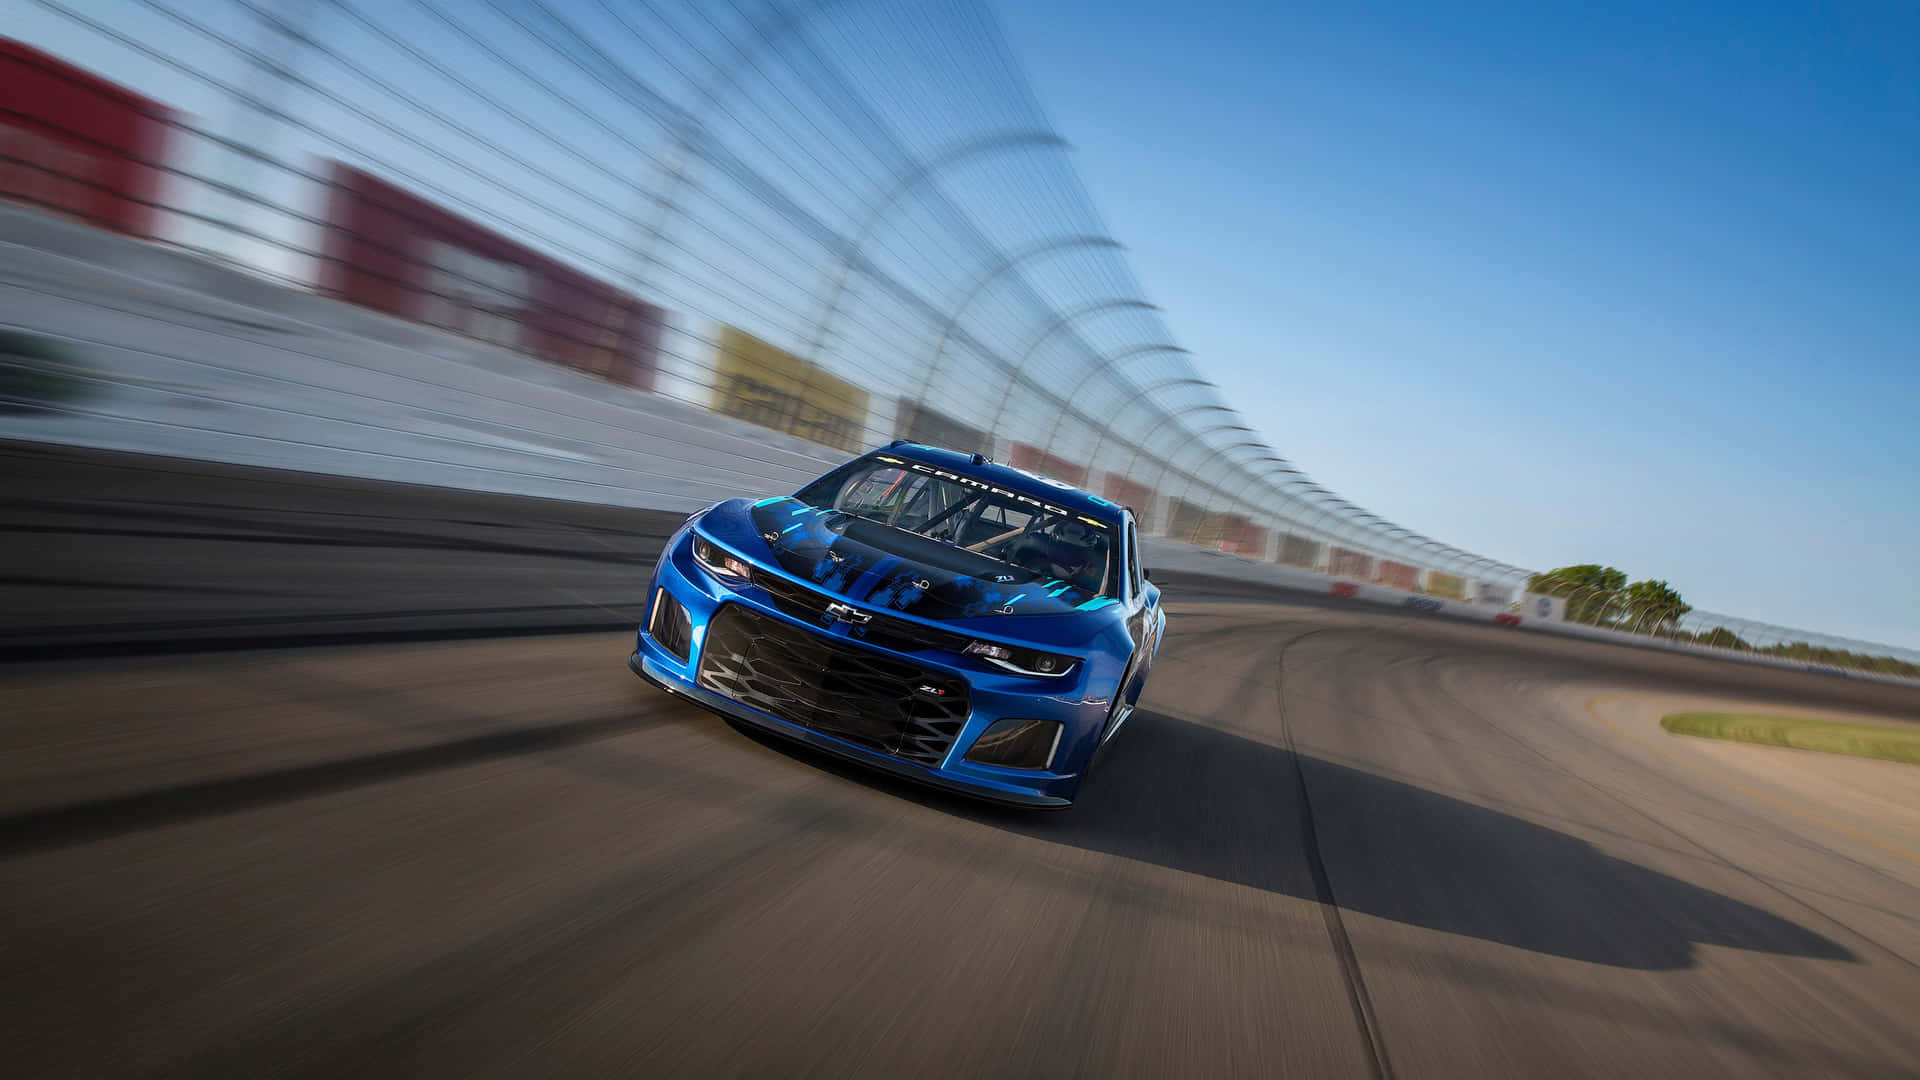 A Thrilling Display of Speed: NASCAR Racing Wallpaper